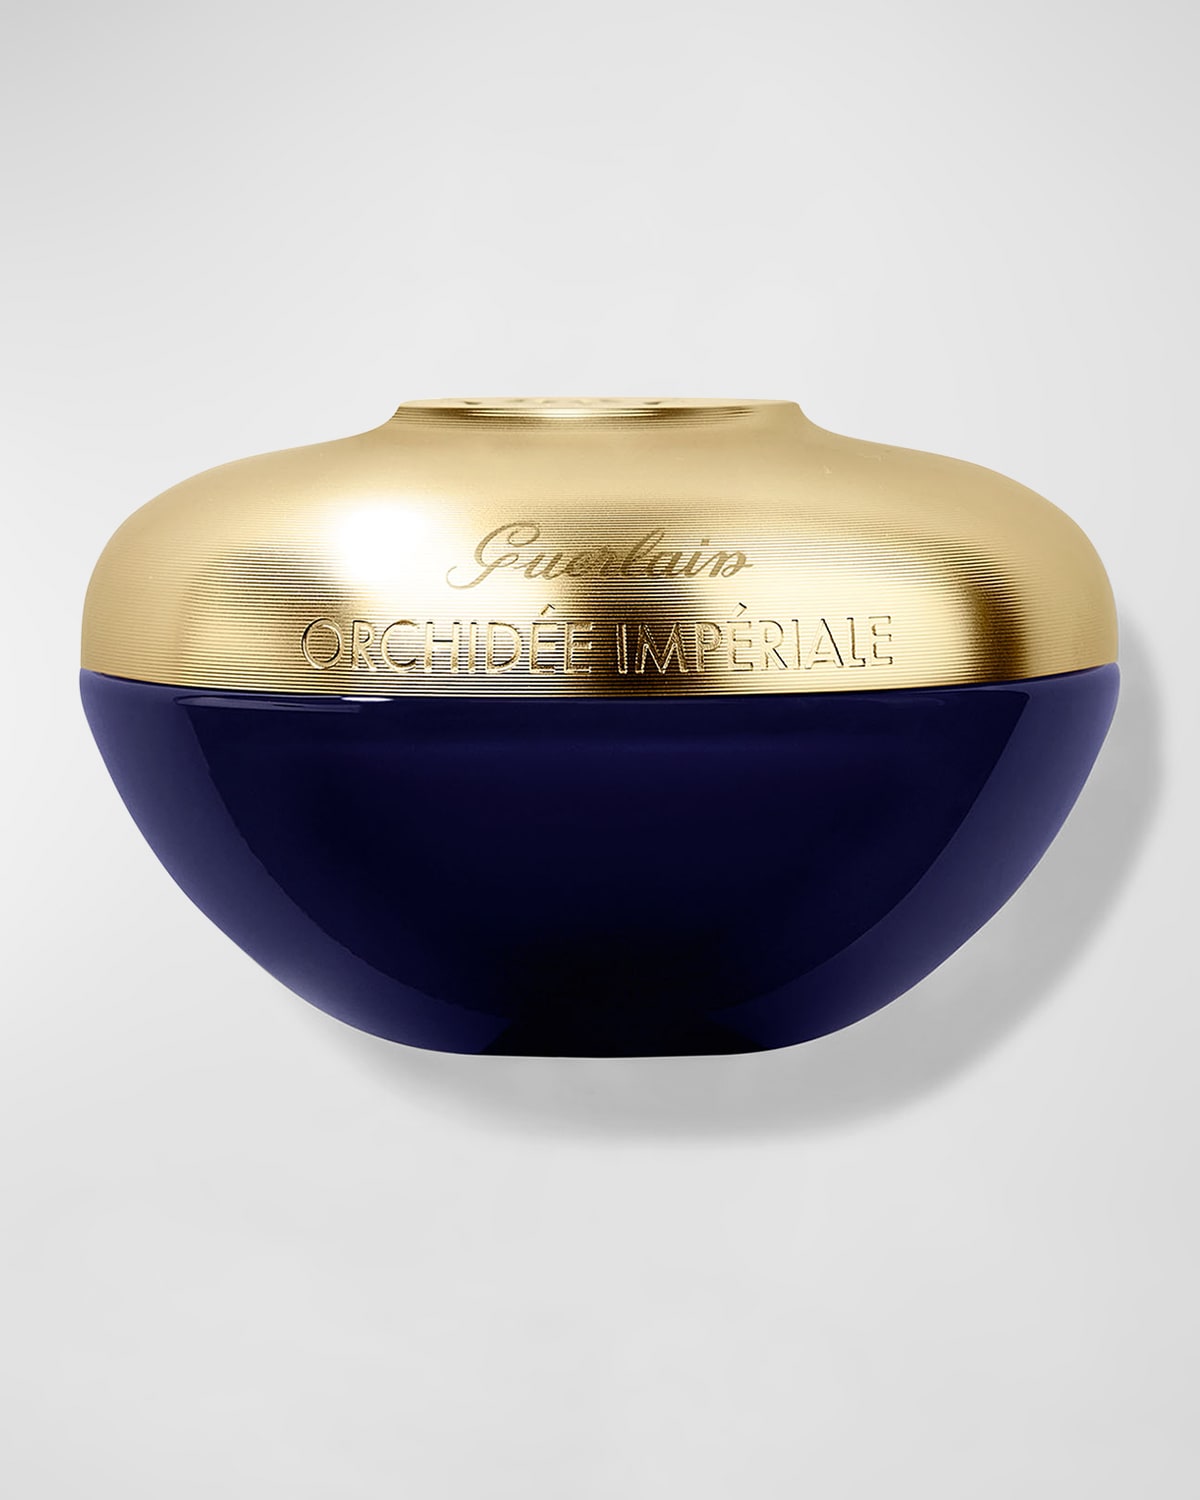 Shop Guerlain Orchidee Imperiale Anti-aging Mask, 2.5 Oz.